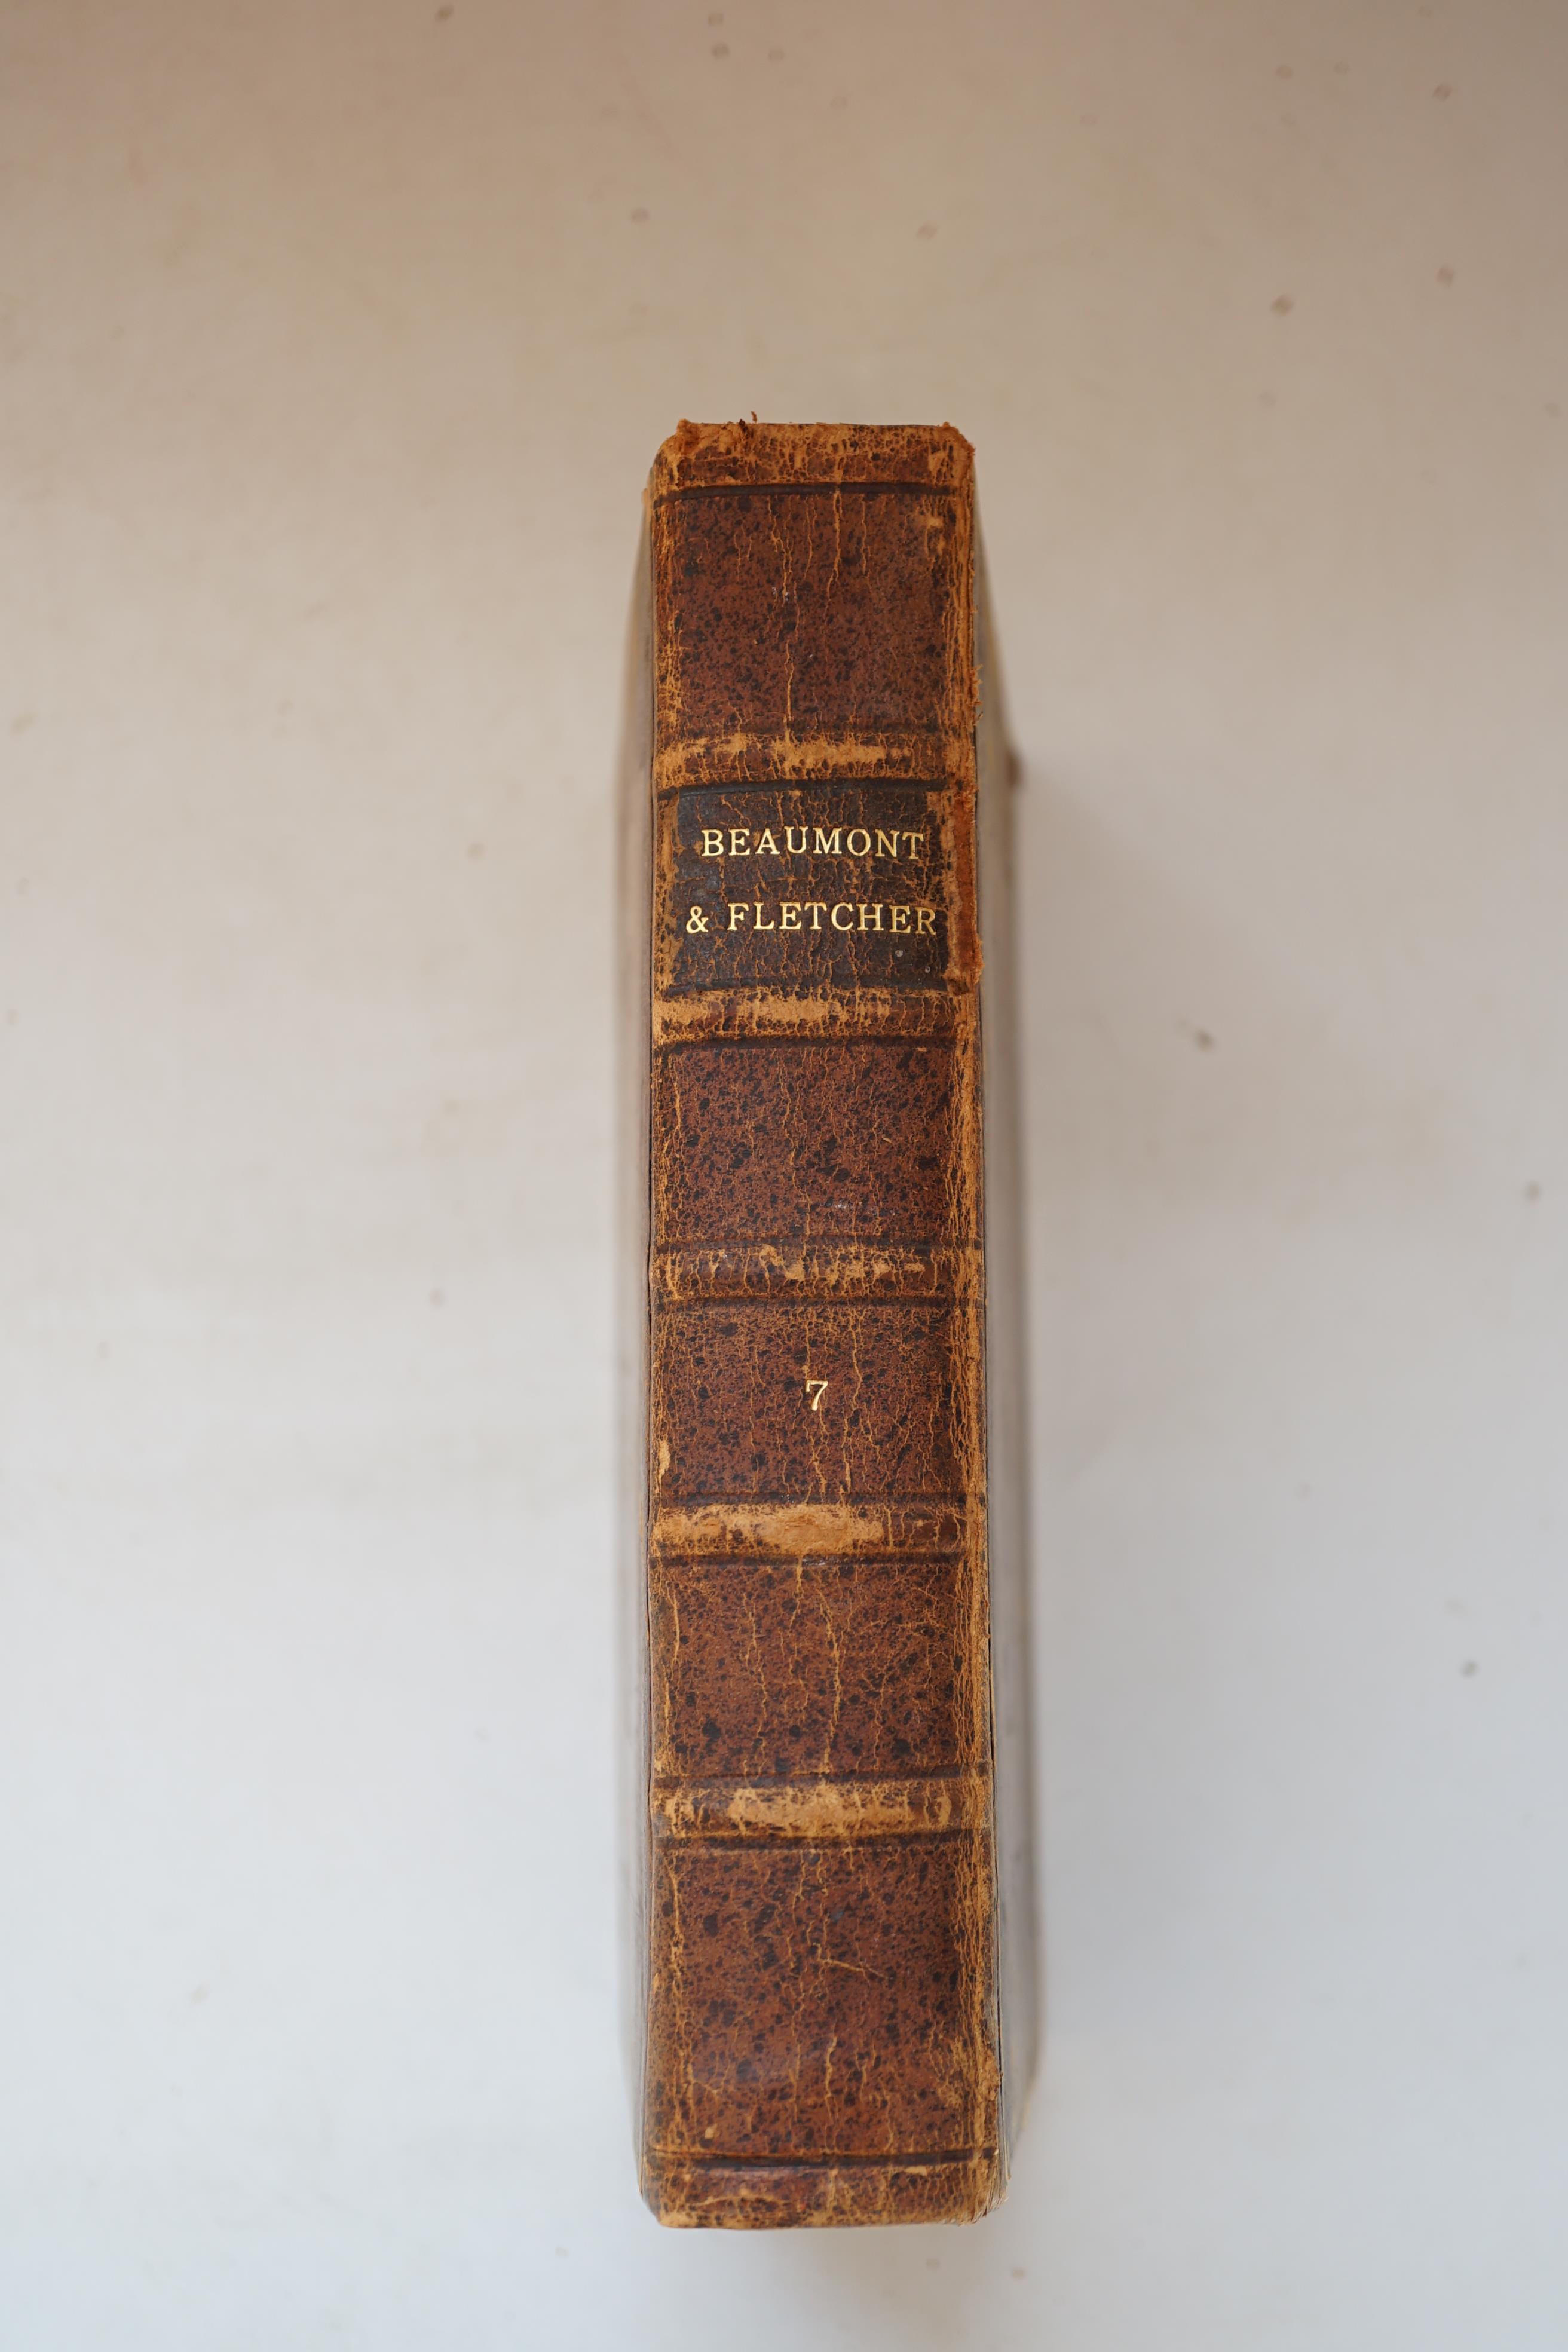 Beaumont, Francis and John Fletcher - The Works of Mr. Francis Beaumont, and John Fletcher, 7 vols, with 2 engraved portraits and 47 plates, 8vo, calf rebacked, vol 6 dated 1750 and lacking 4 plates, Jacob Tonson, London